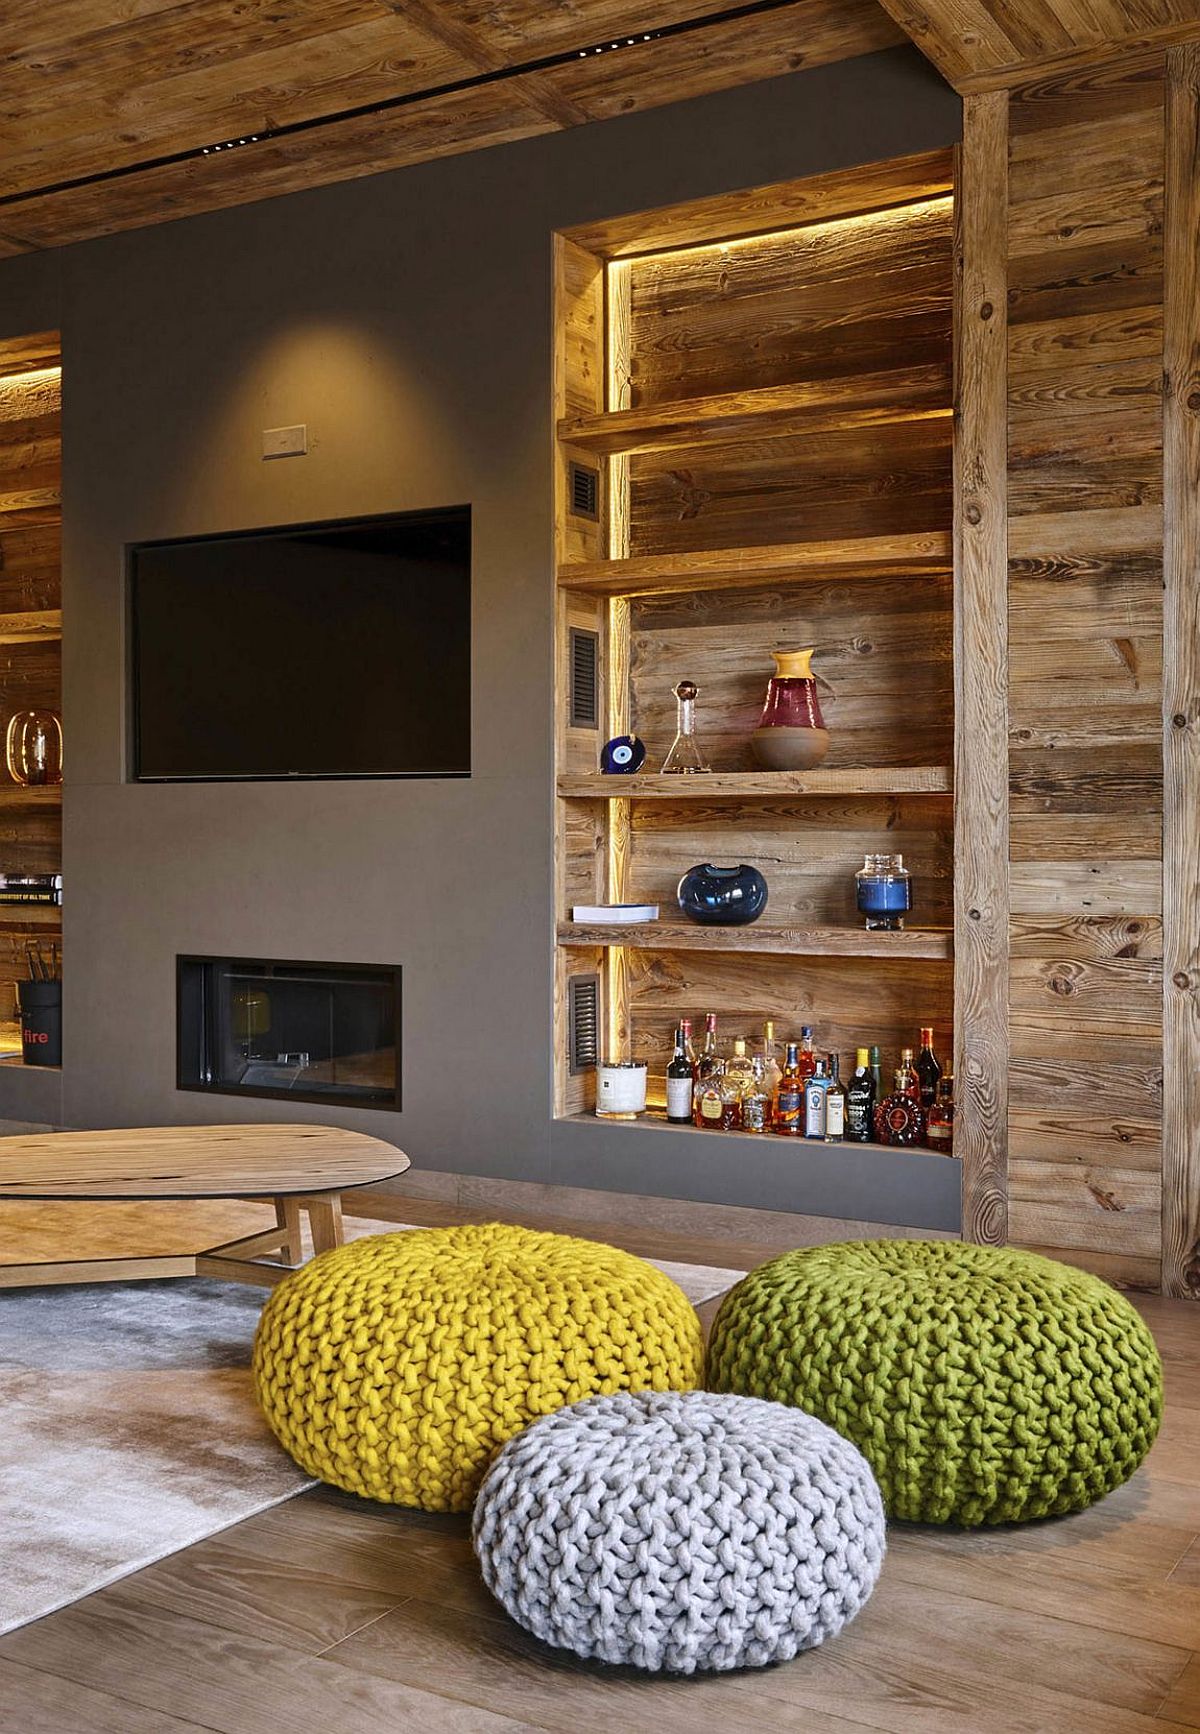 Open wooden shelves next to the TV wall in gray with fireplace below